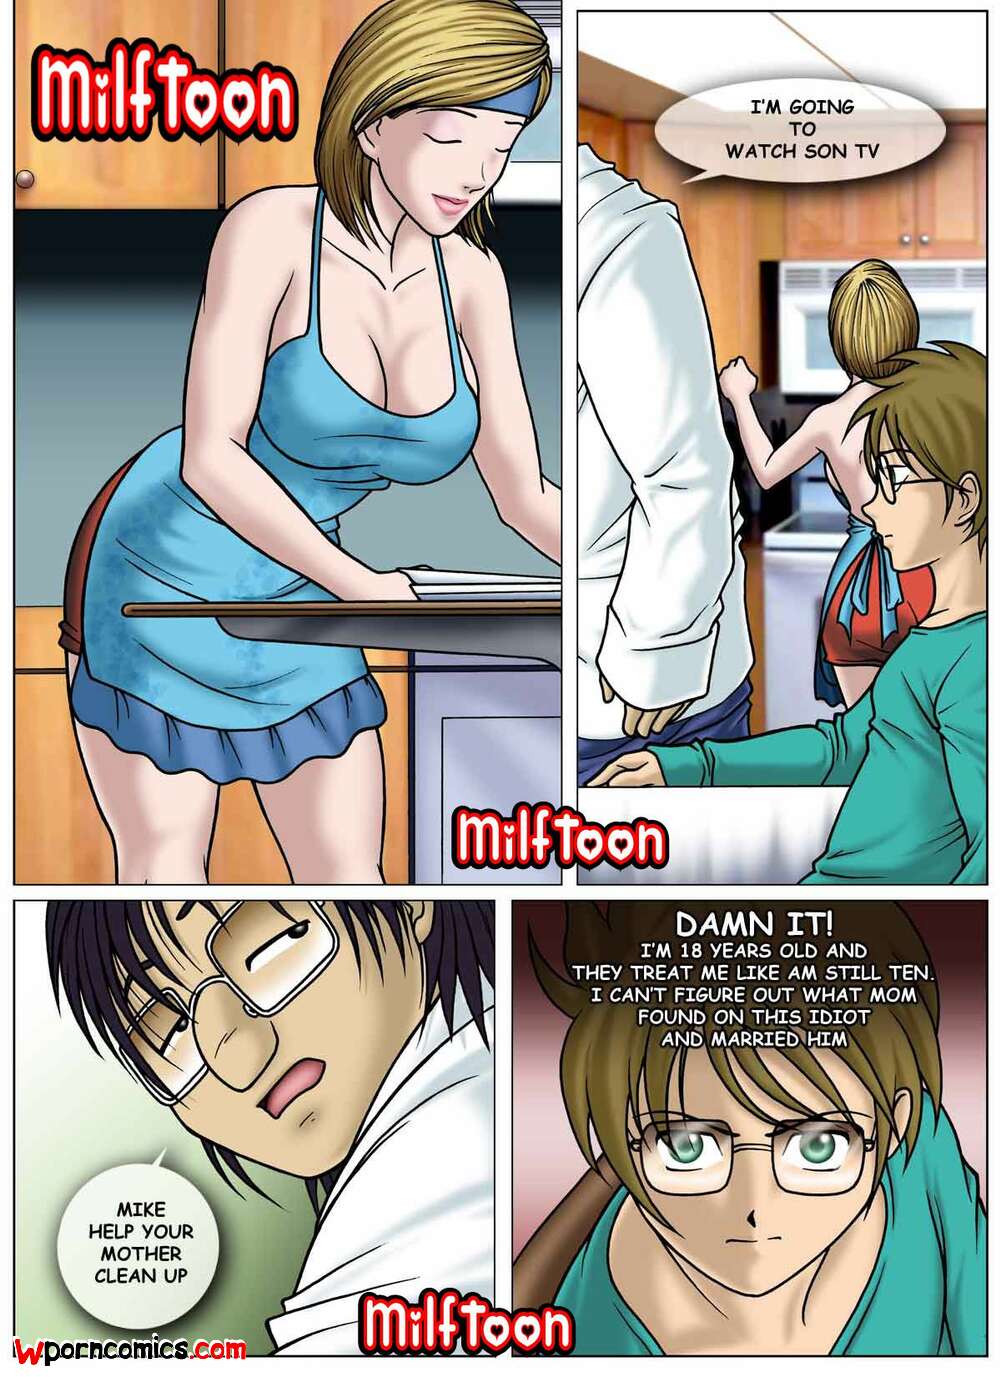 Theres a cure for being a idot porn comic